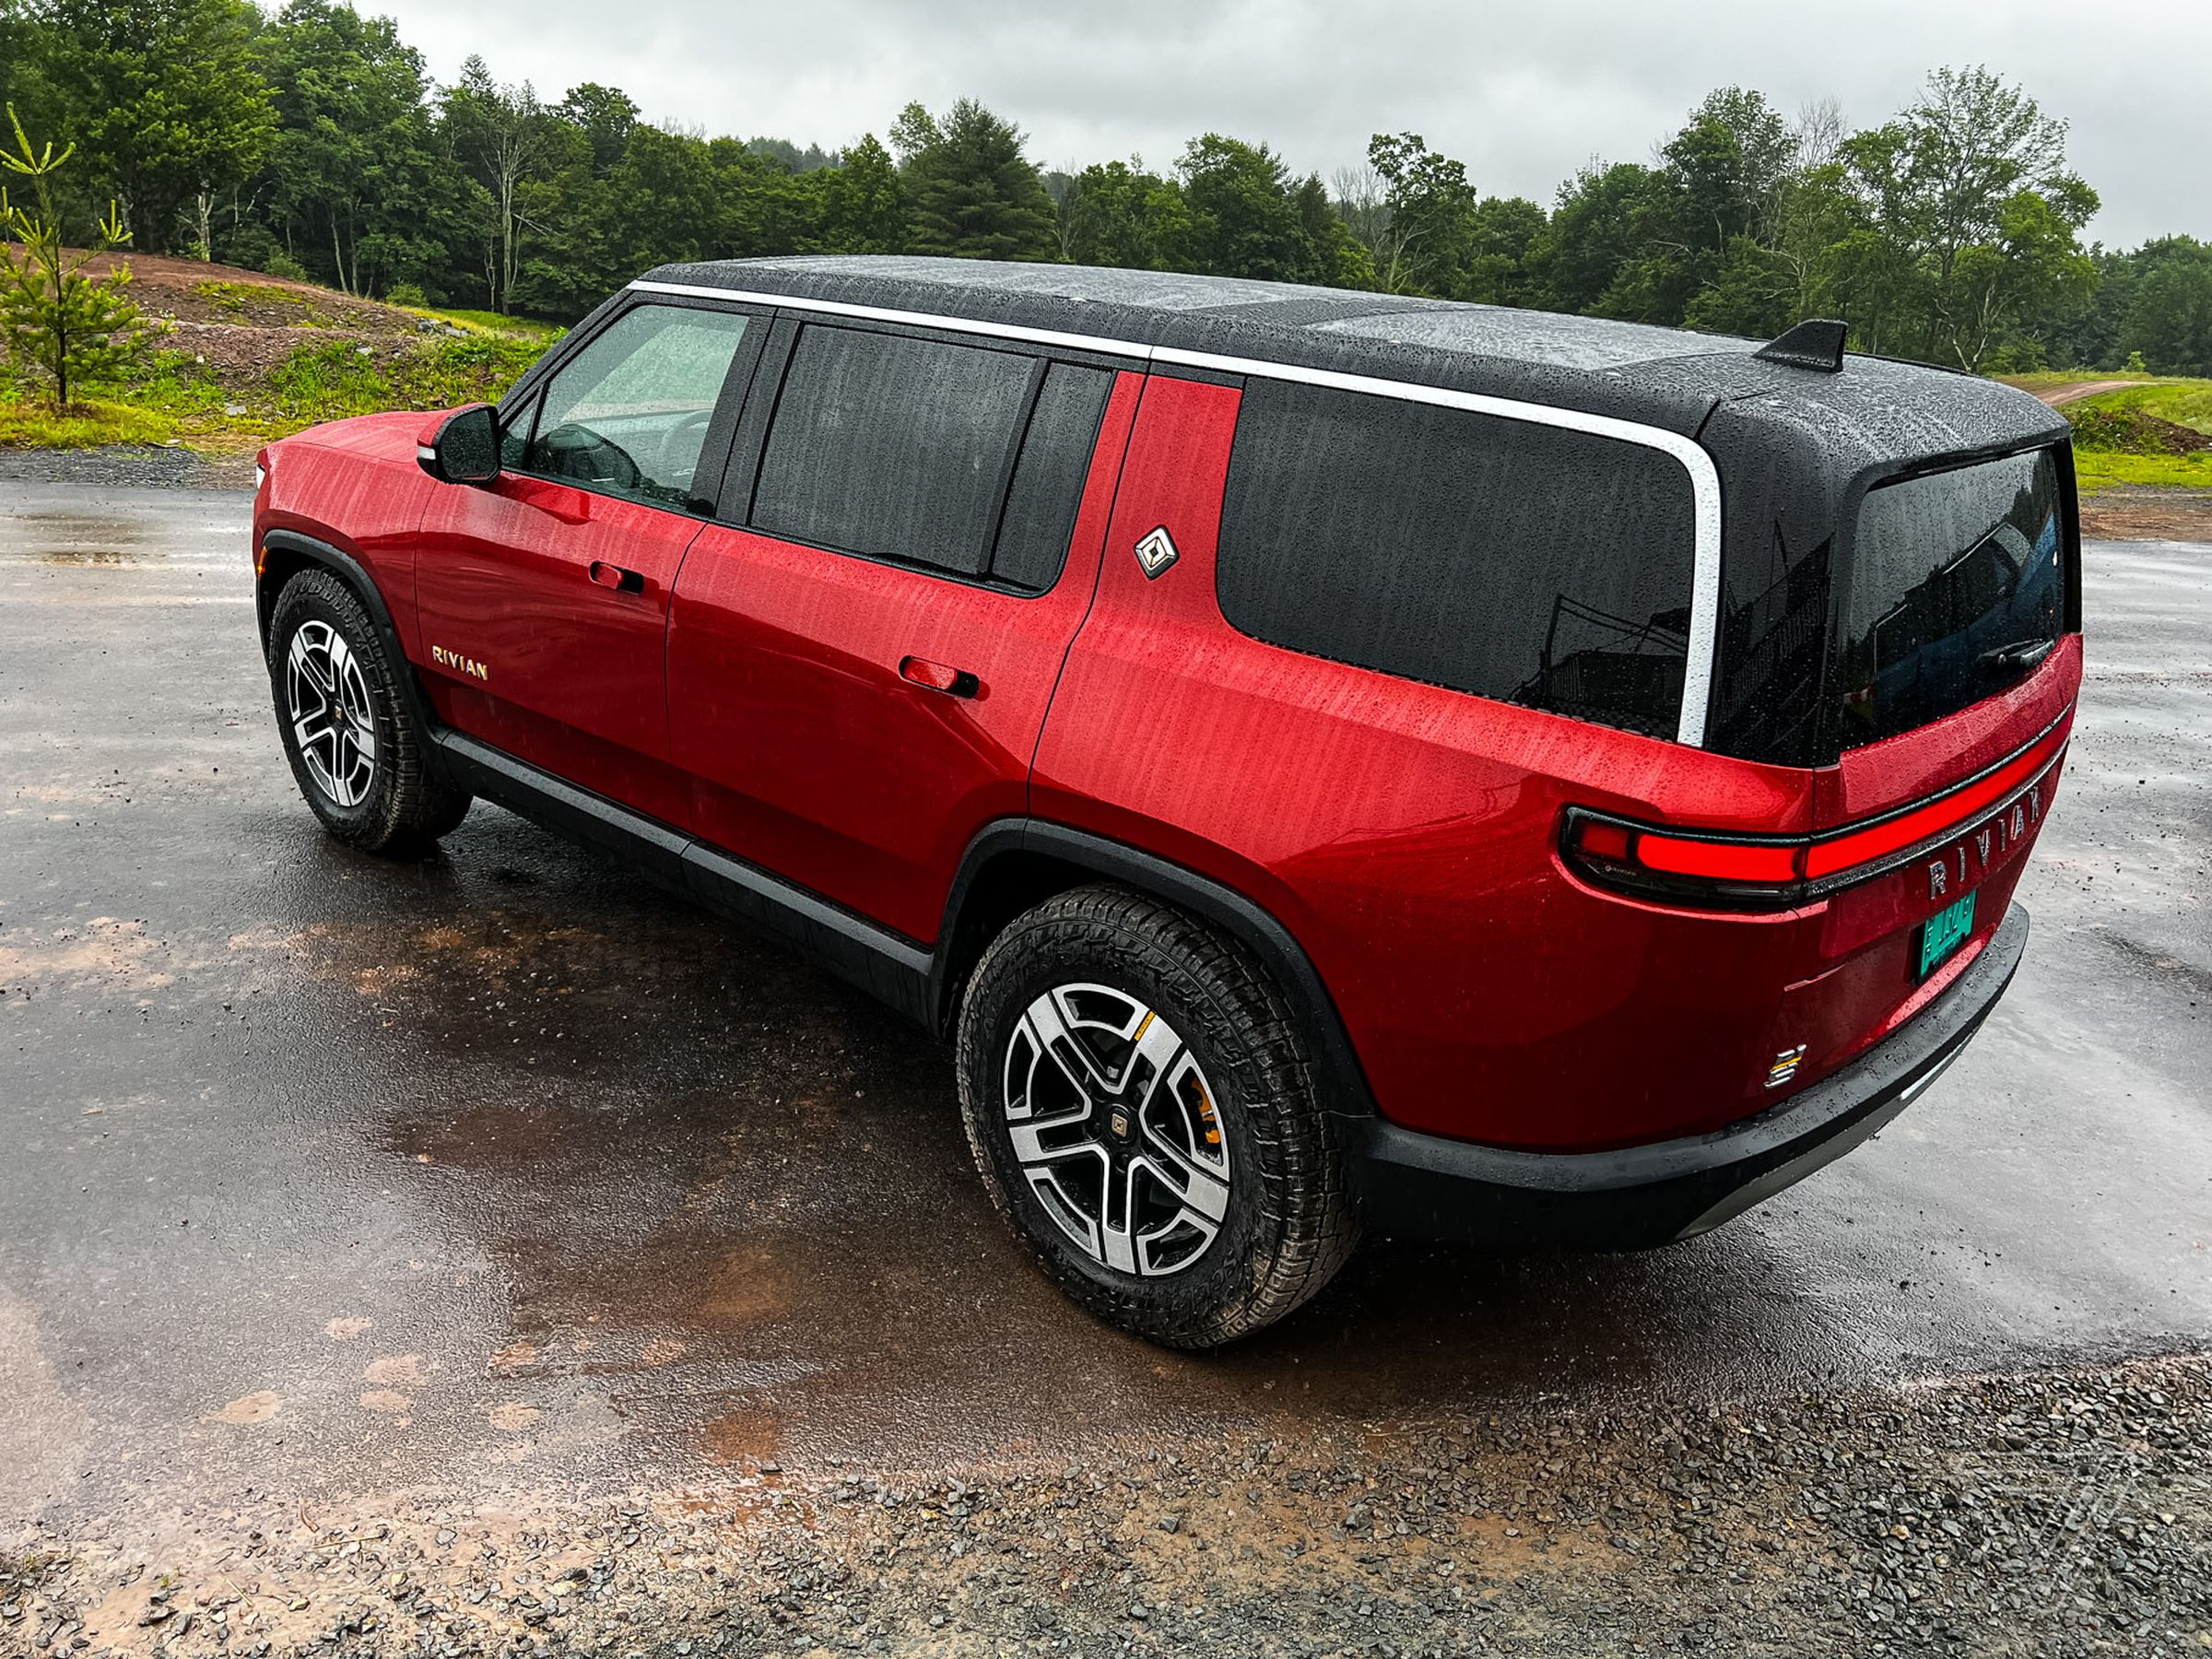 A red Rivian R1s from the rear